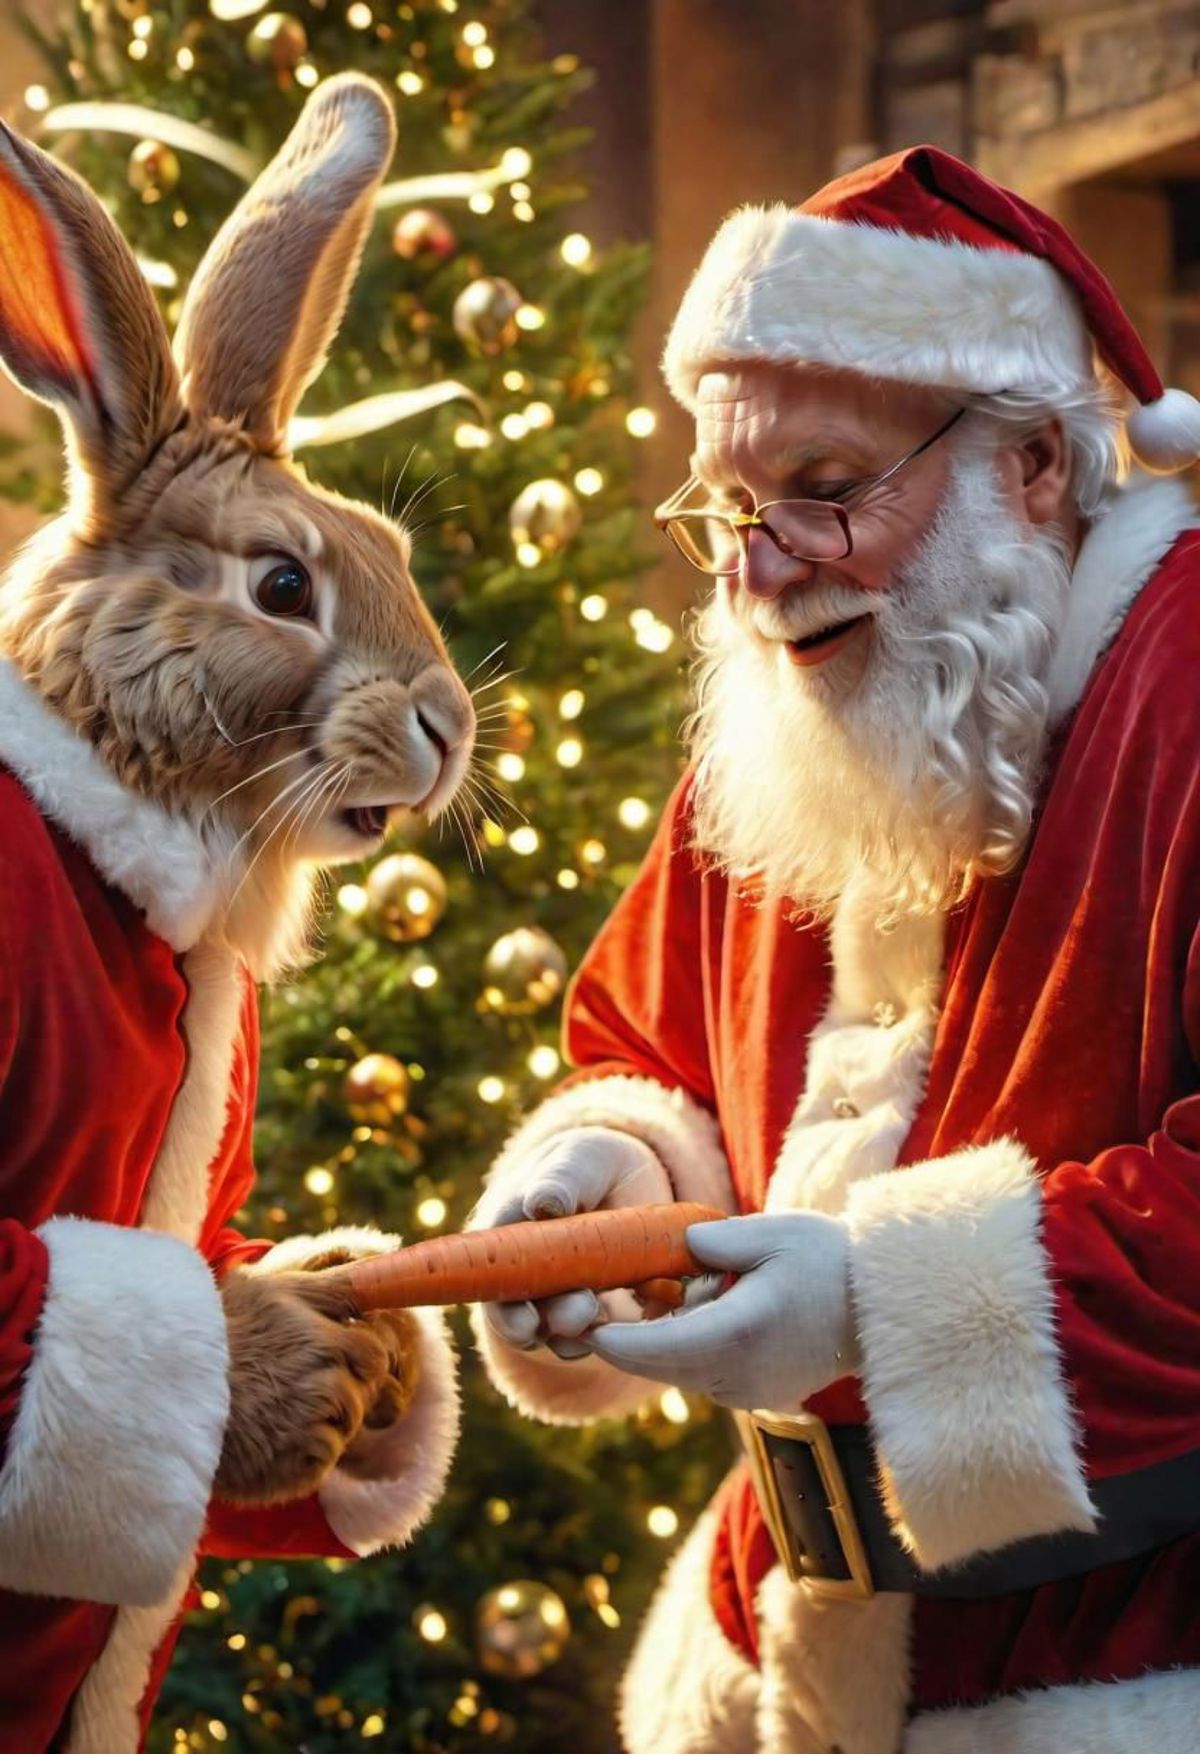 The easter bunny is giving laughing Santa claus a carrot with a ribbon, surprise, happiness, joy, festive background, gldn...